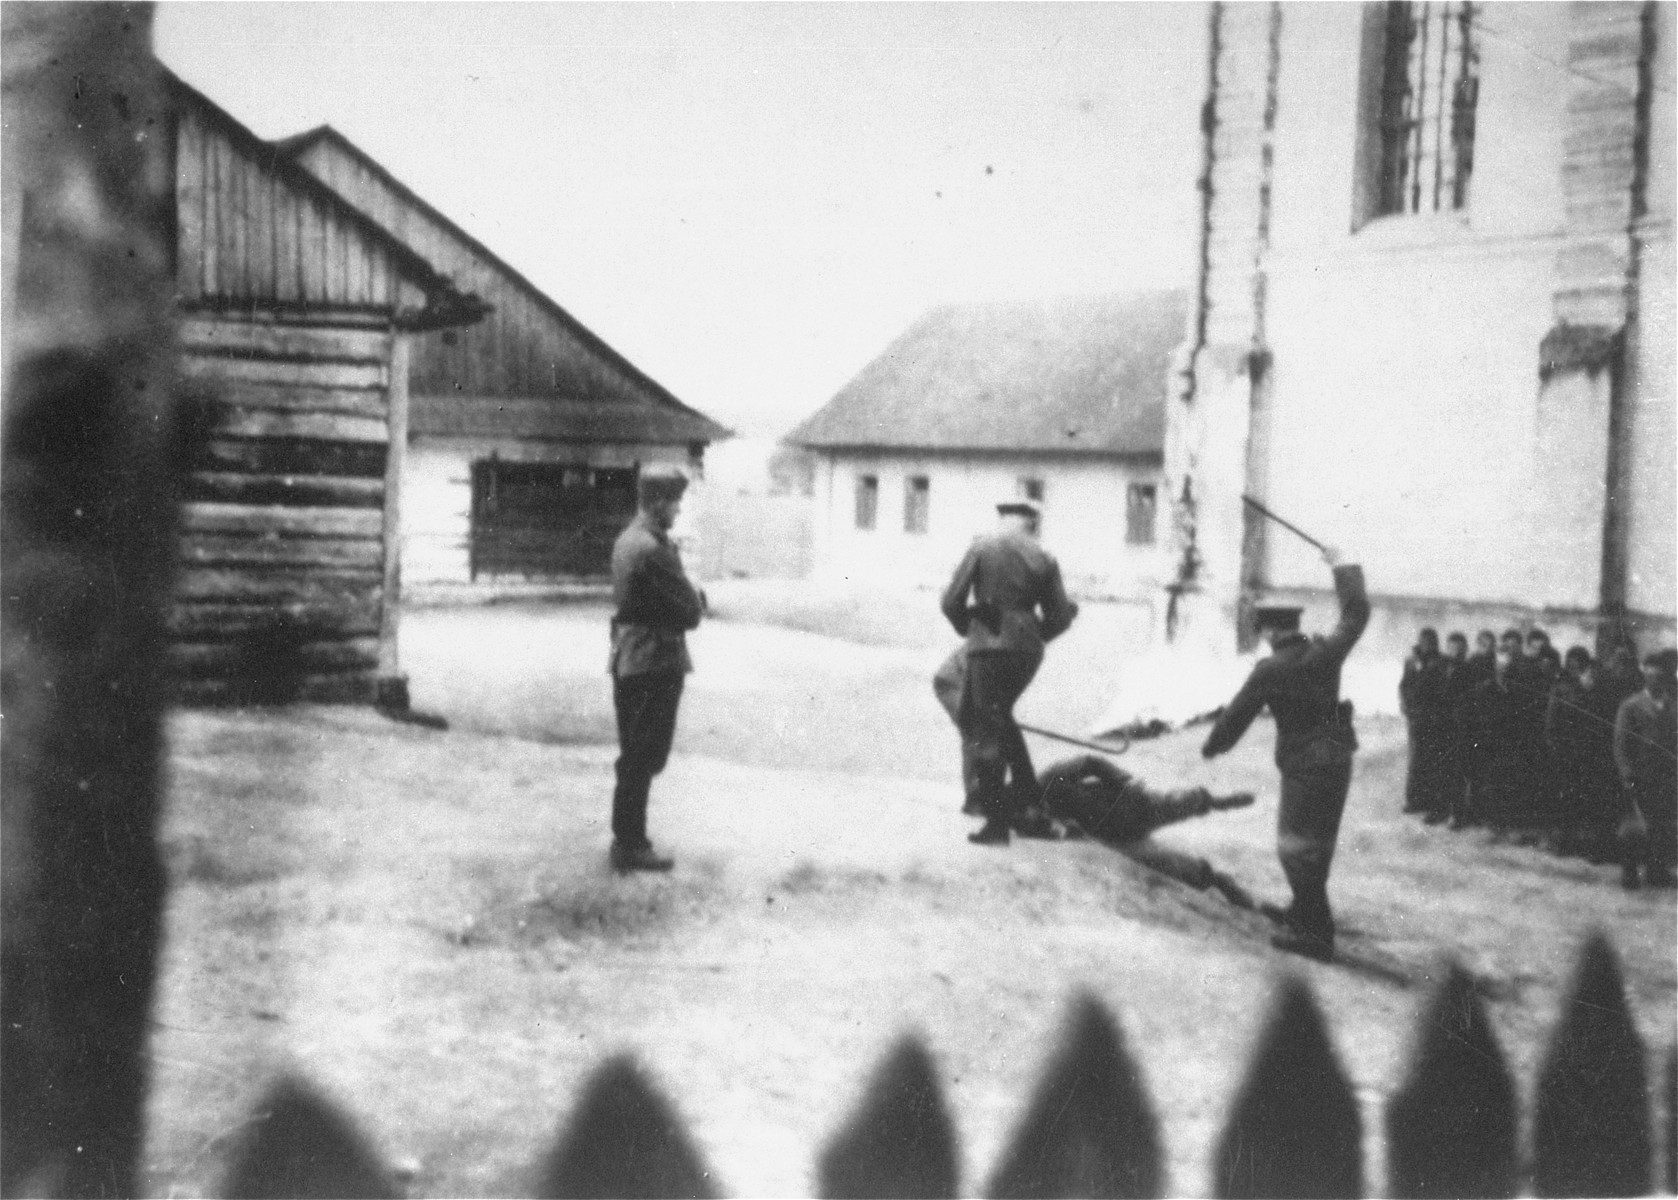 Camp guards beat a prisoner at the Cieszanow labor camp.